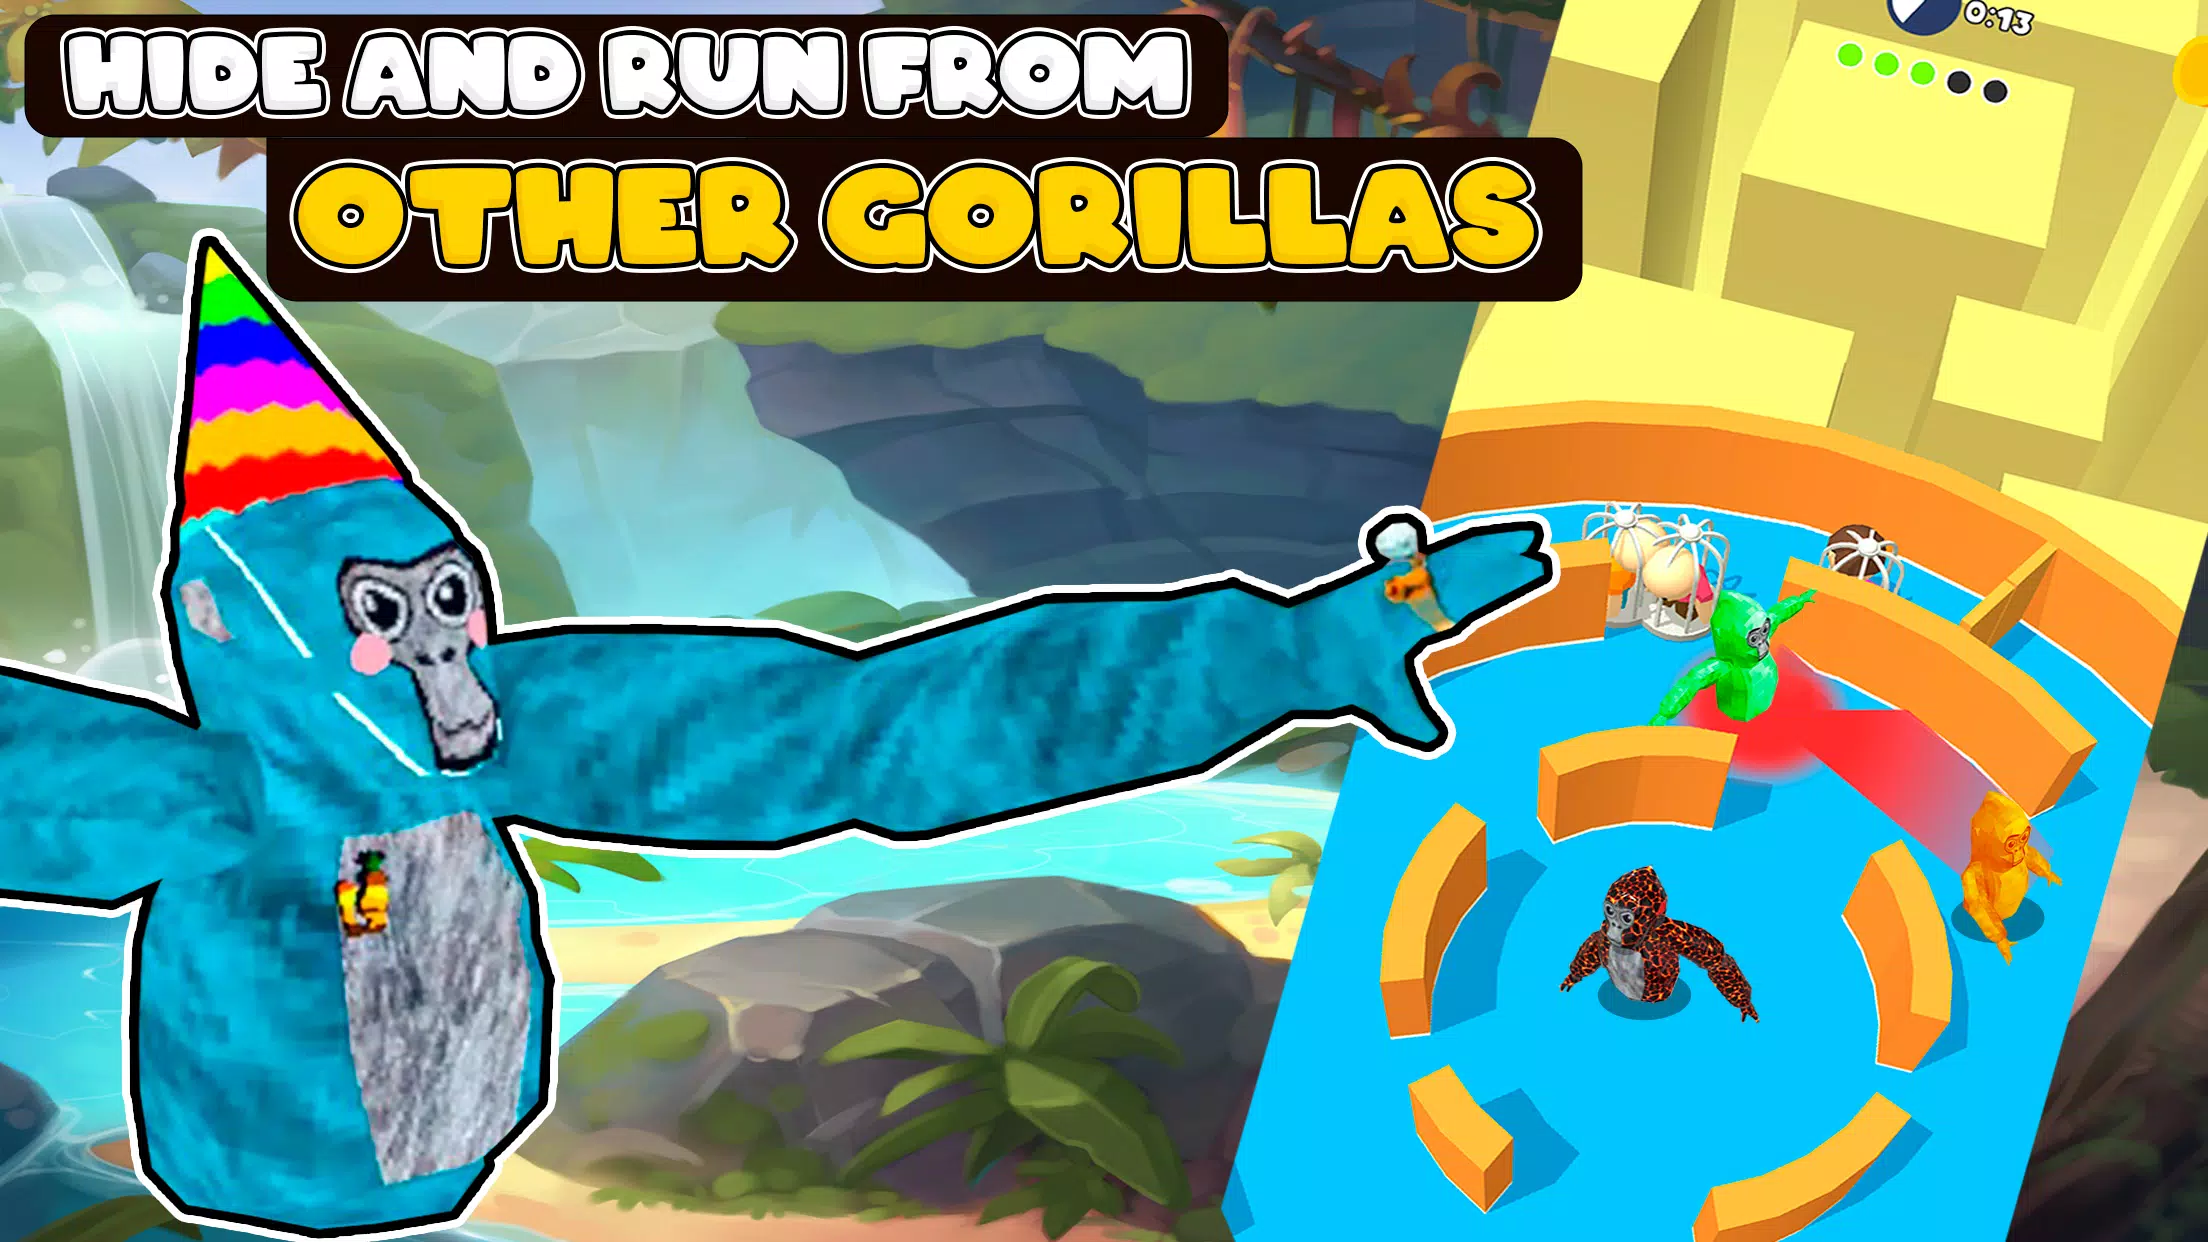 Download Gorilla (TAG) Game android on PC